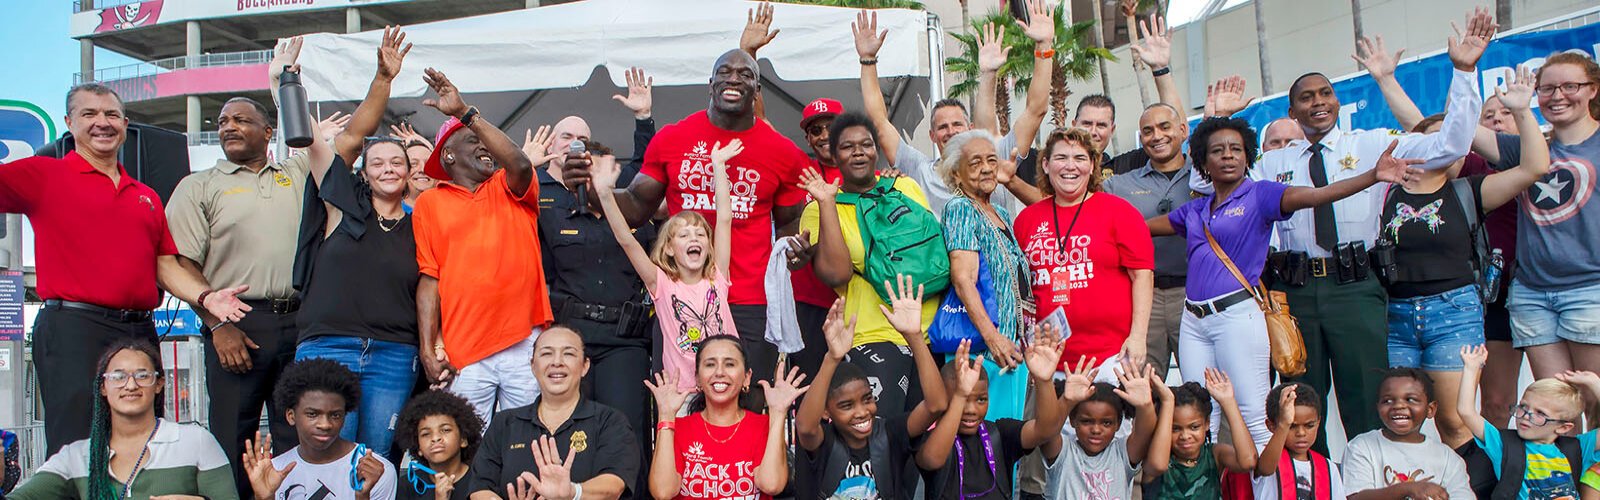 Thaddeus Bullard put on the Bullard Family Foundation's sixth annual Back to School Bash with help from the Bucs, local government and law enforcement agencies, hundreds of volunteers and more than 100 corporate sponsors.